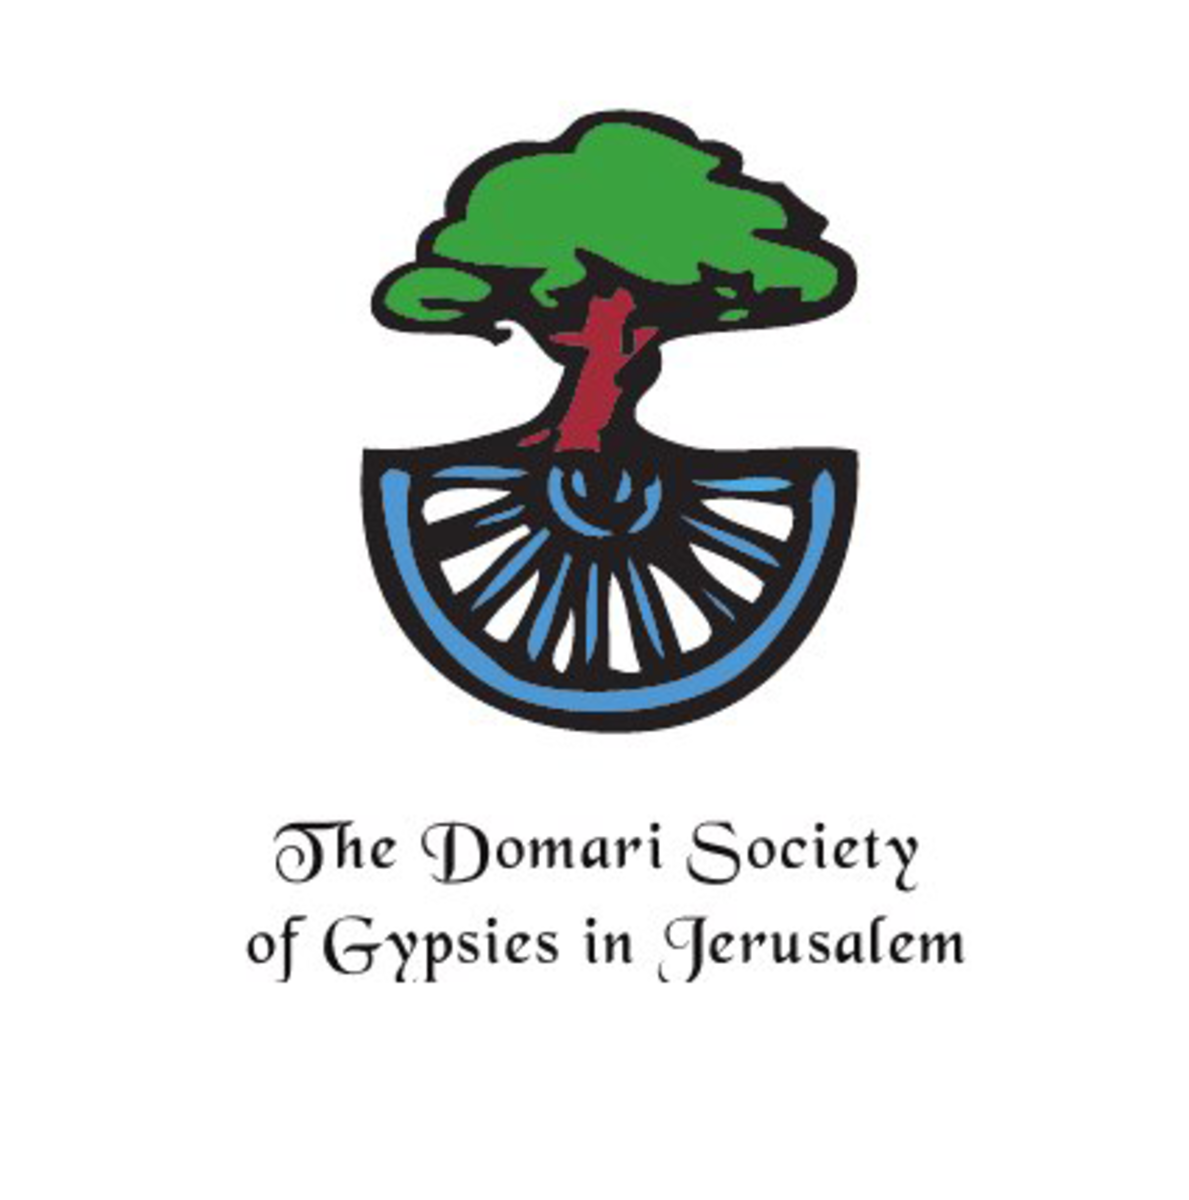 the-history-of-the-gypsies-the-romani-and-domari-people-two-distinct-groups-with-a-1-700-year-old-history